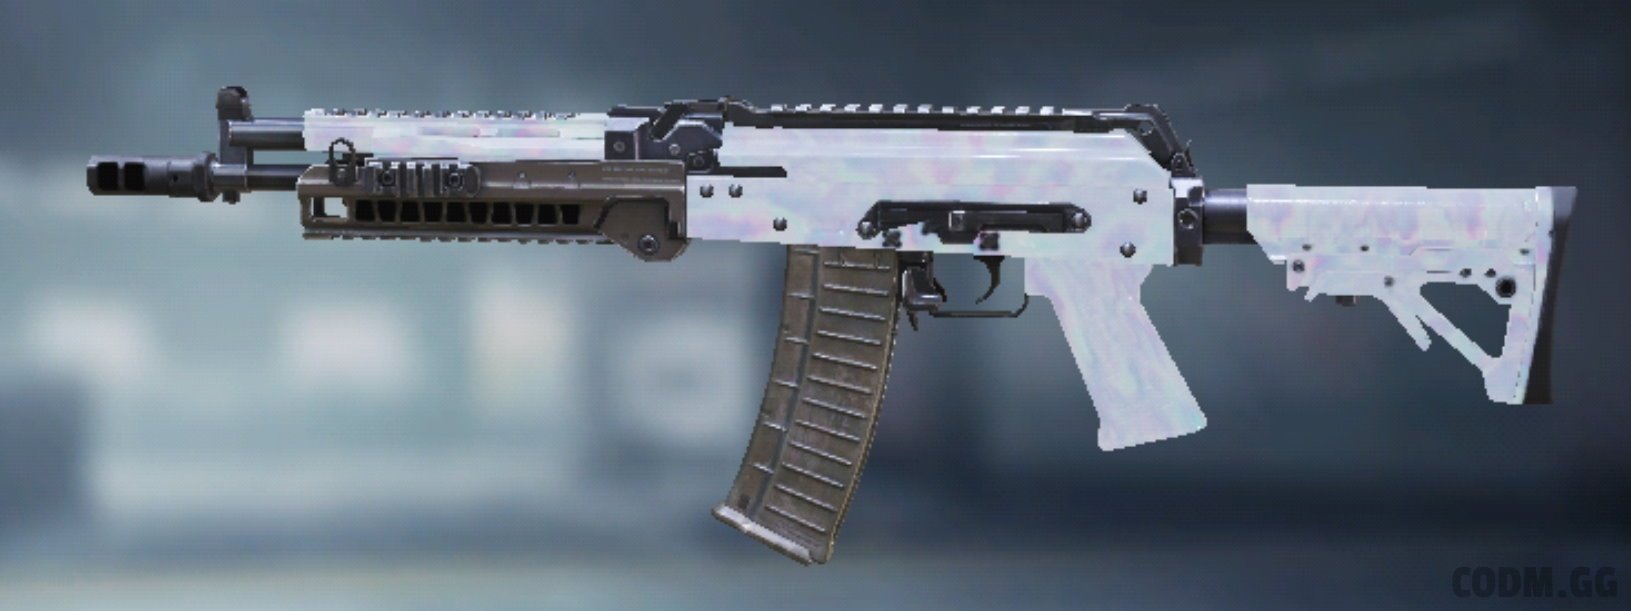 AK117 Moonstone, Epic camo in Call of Duty Mobile